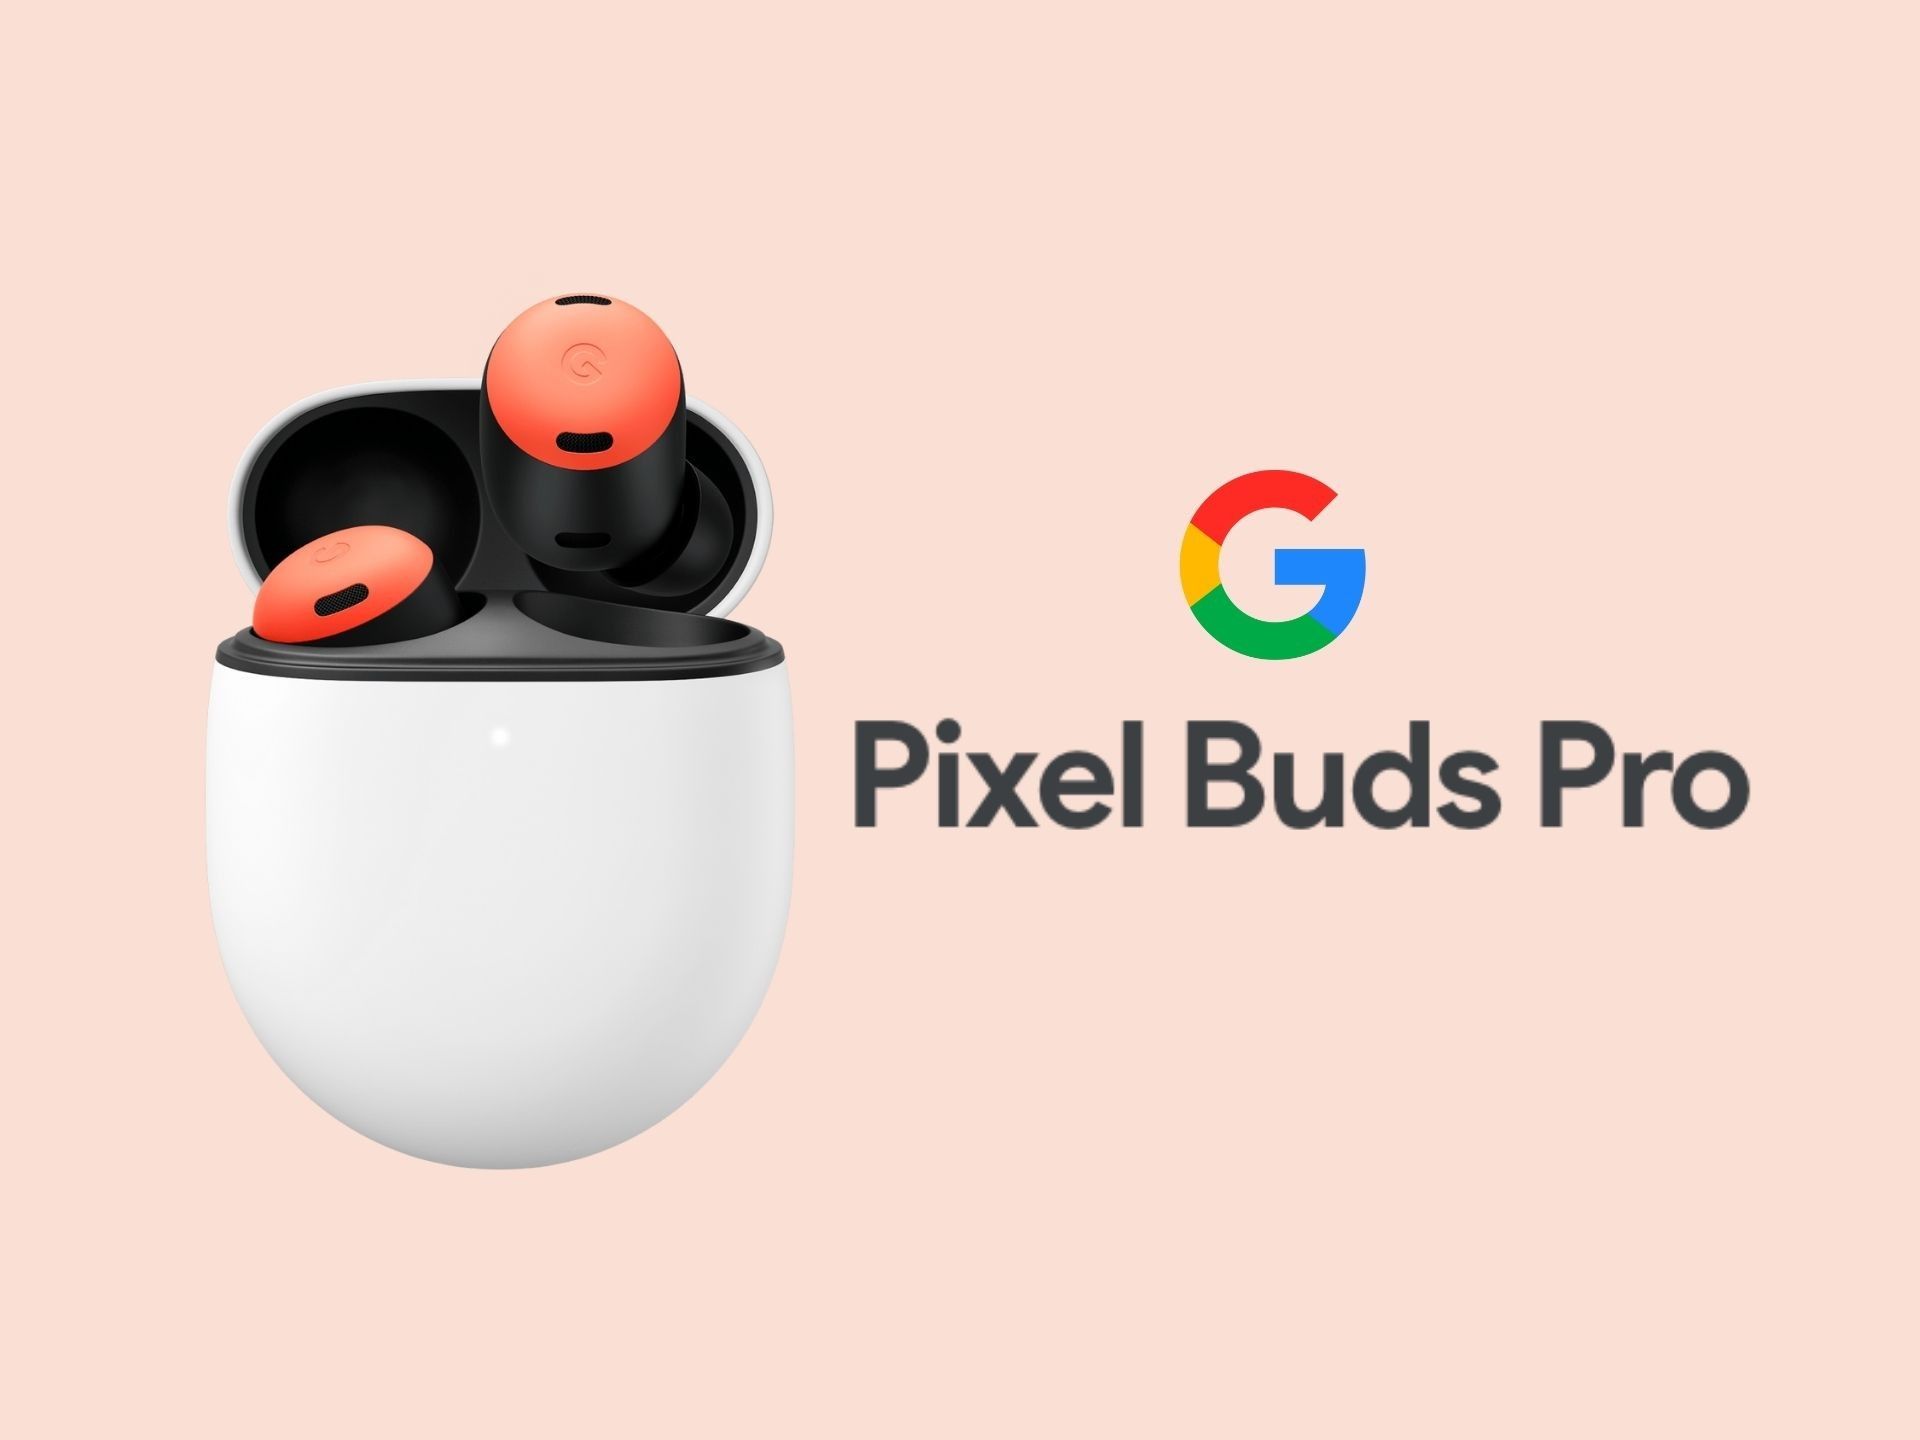 Google Pixel Buds Pro is coming, and here's everything we